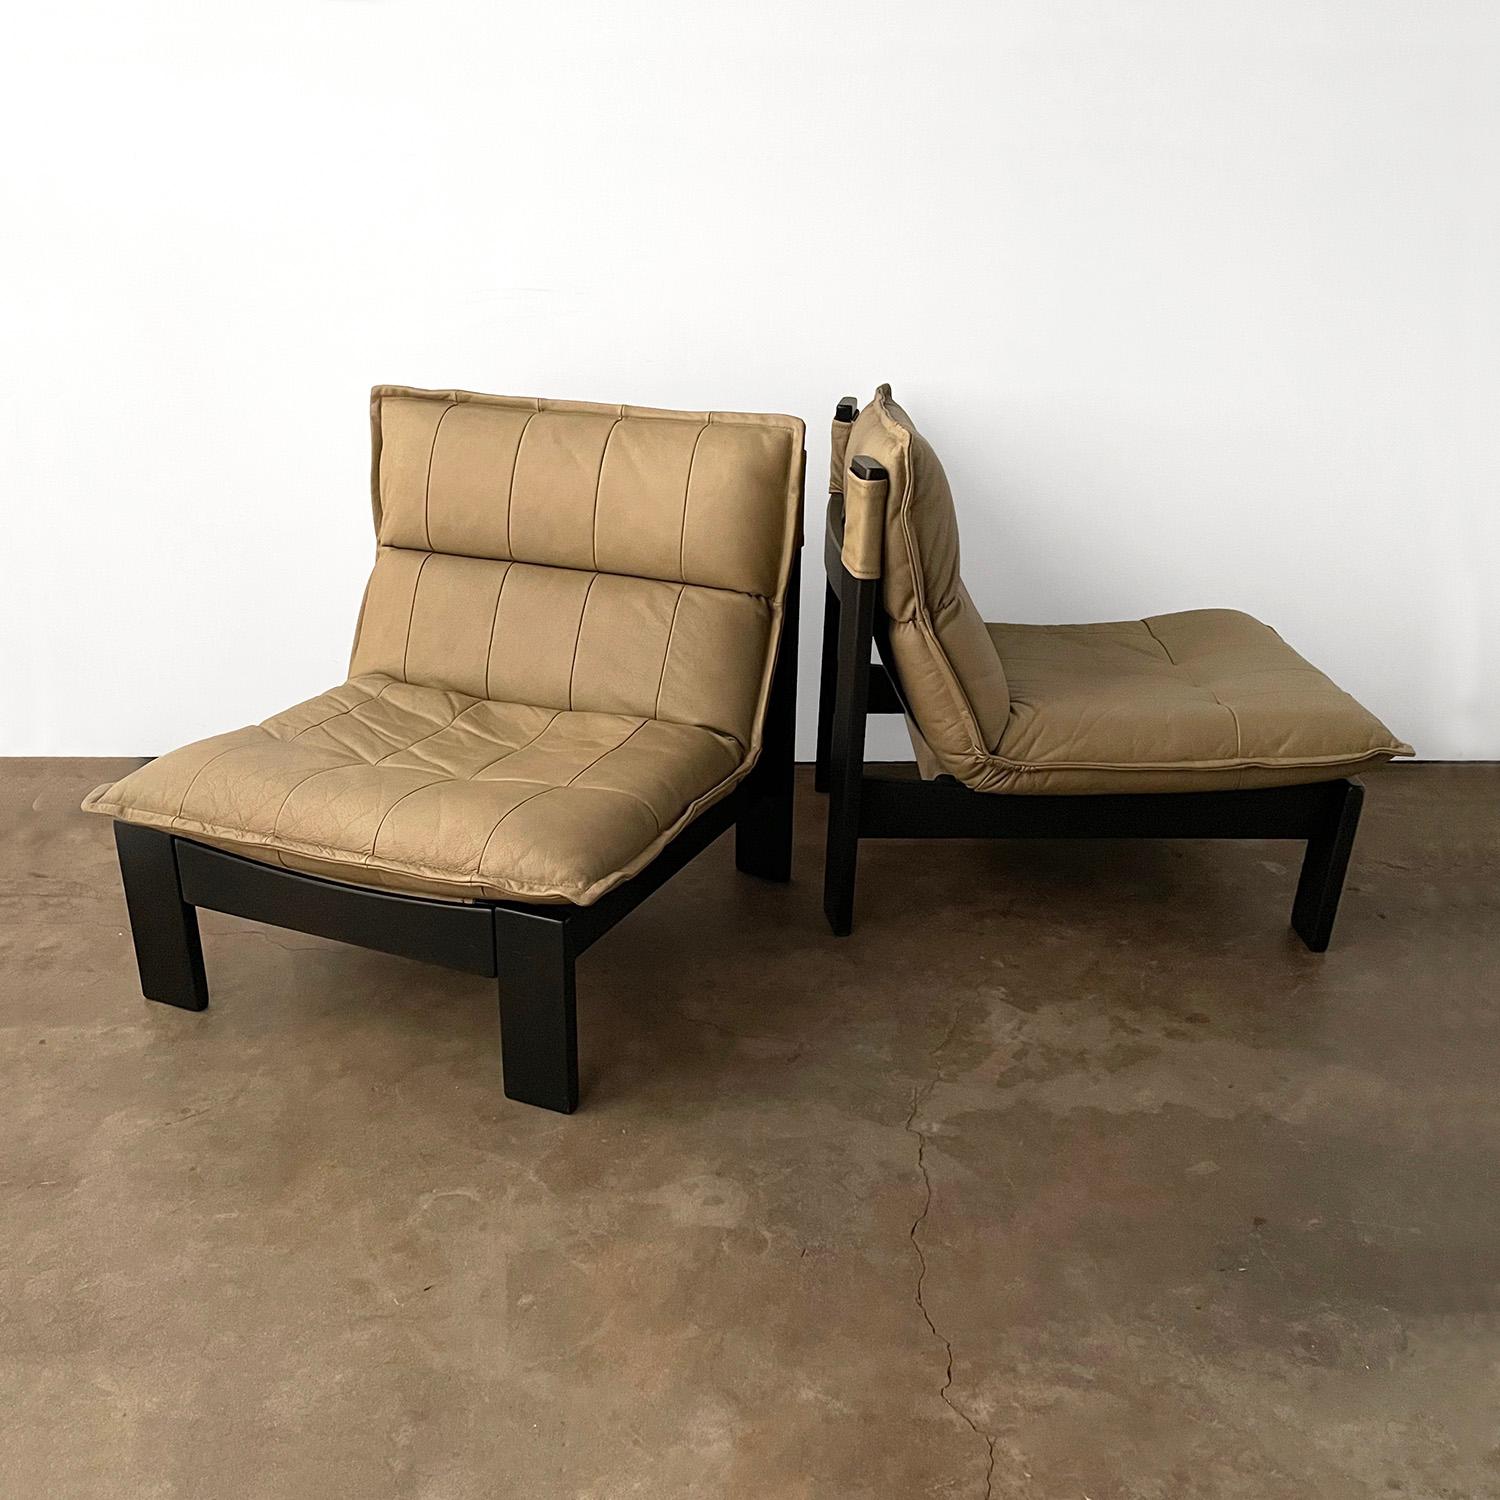 Pair of Italian leather sling chairs
Italy, circa 1970’s
Earthy olive green leather
Leather newly restored
Small markings to leather and one small imprint
*See photos
Wooden frame
Patina from age and use.